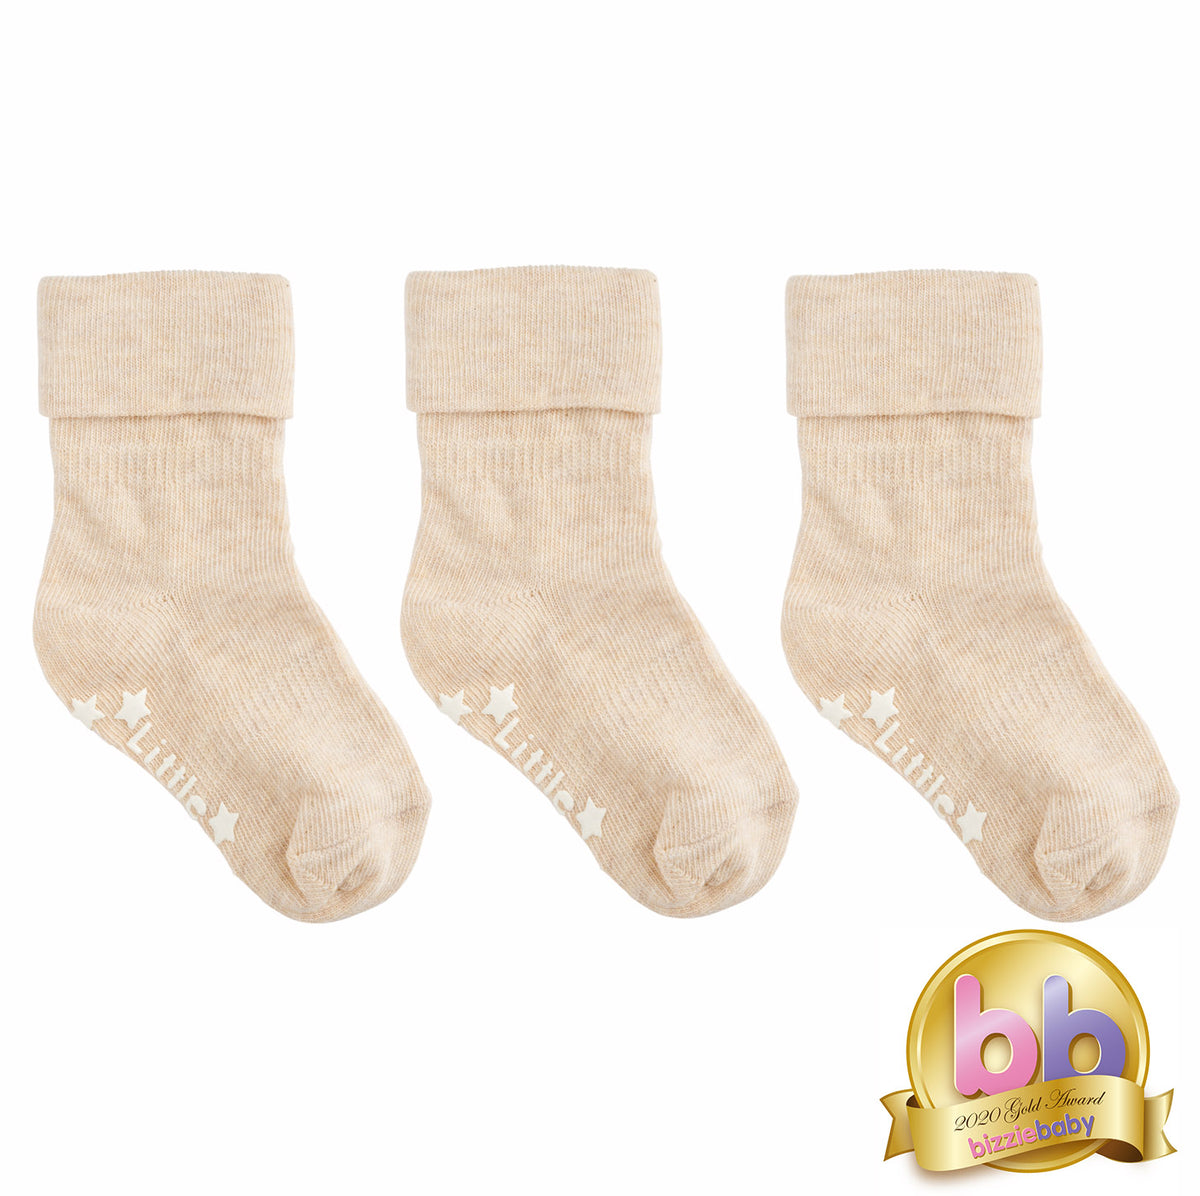 Talipes (clubfoot) Boots and Bar Socks - Non-Slip + Stay On Baby and Toddler Socks - 3 Pack in Oatmeal